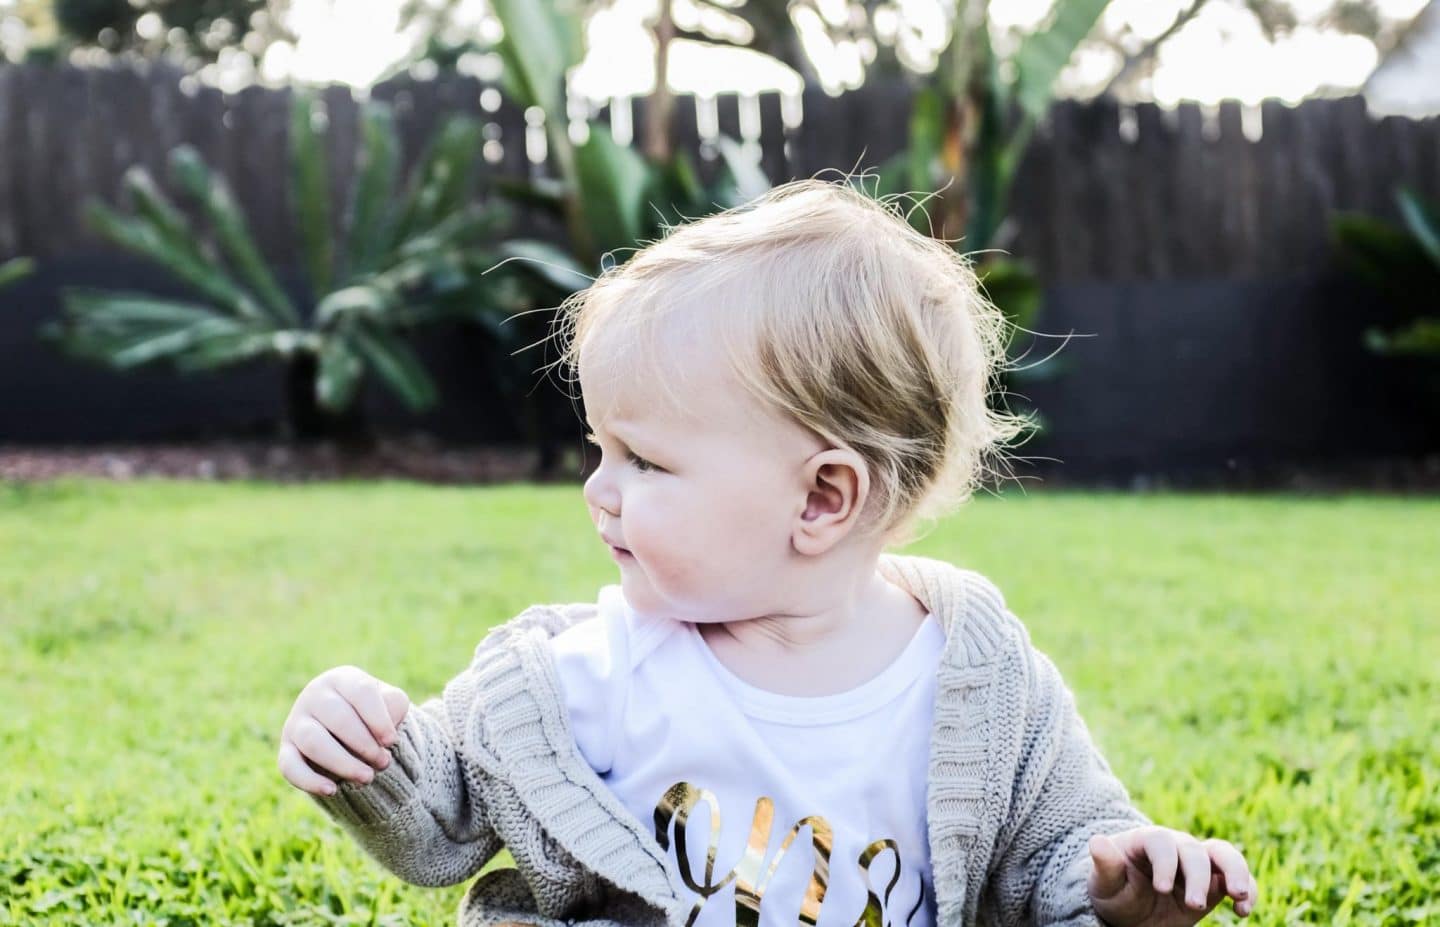 blonde haired baby on the grass in a shirt that says ONE in gold script